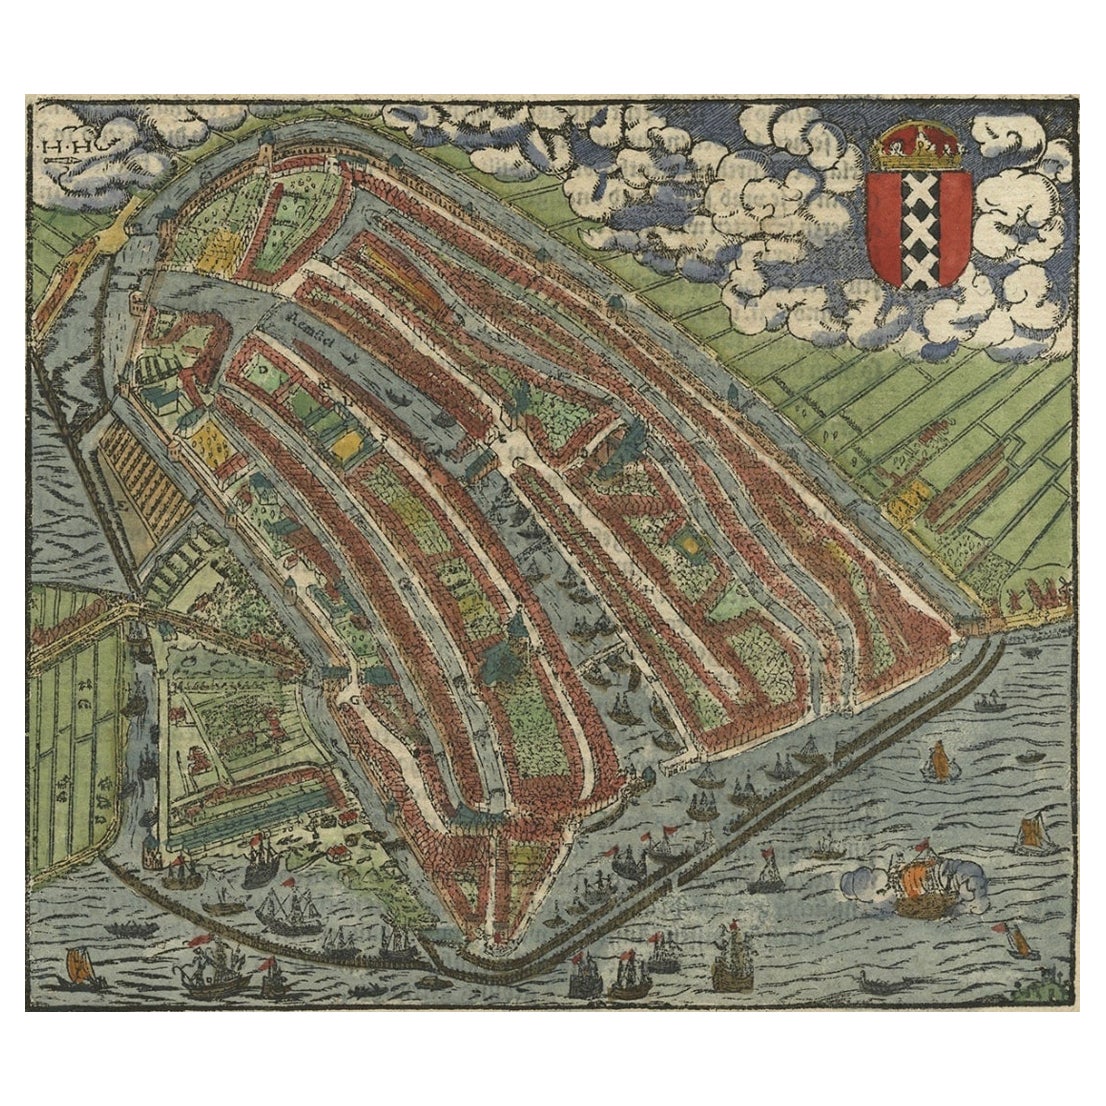 Old Original Hand-Colored Engraving of a Bird's-eye Plan of Amsterdam, ca.1580 For Sale